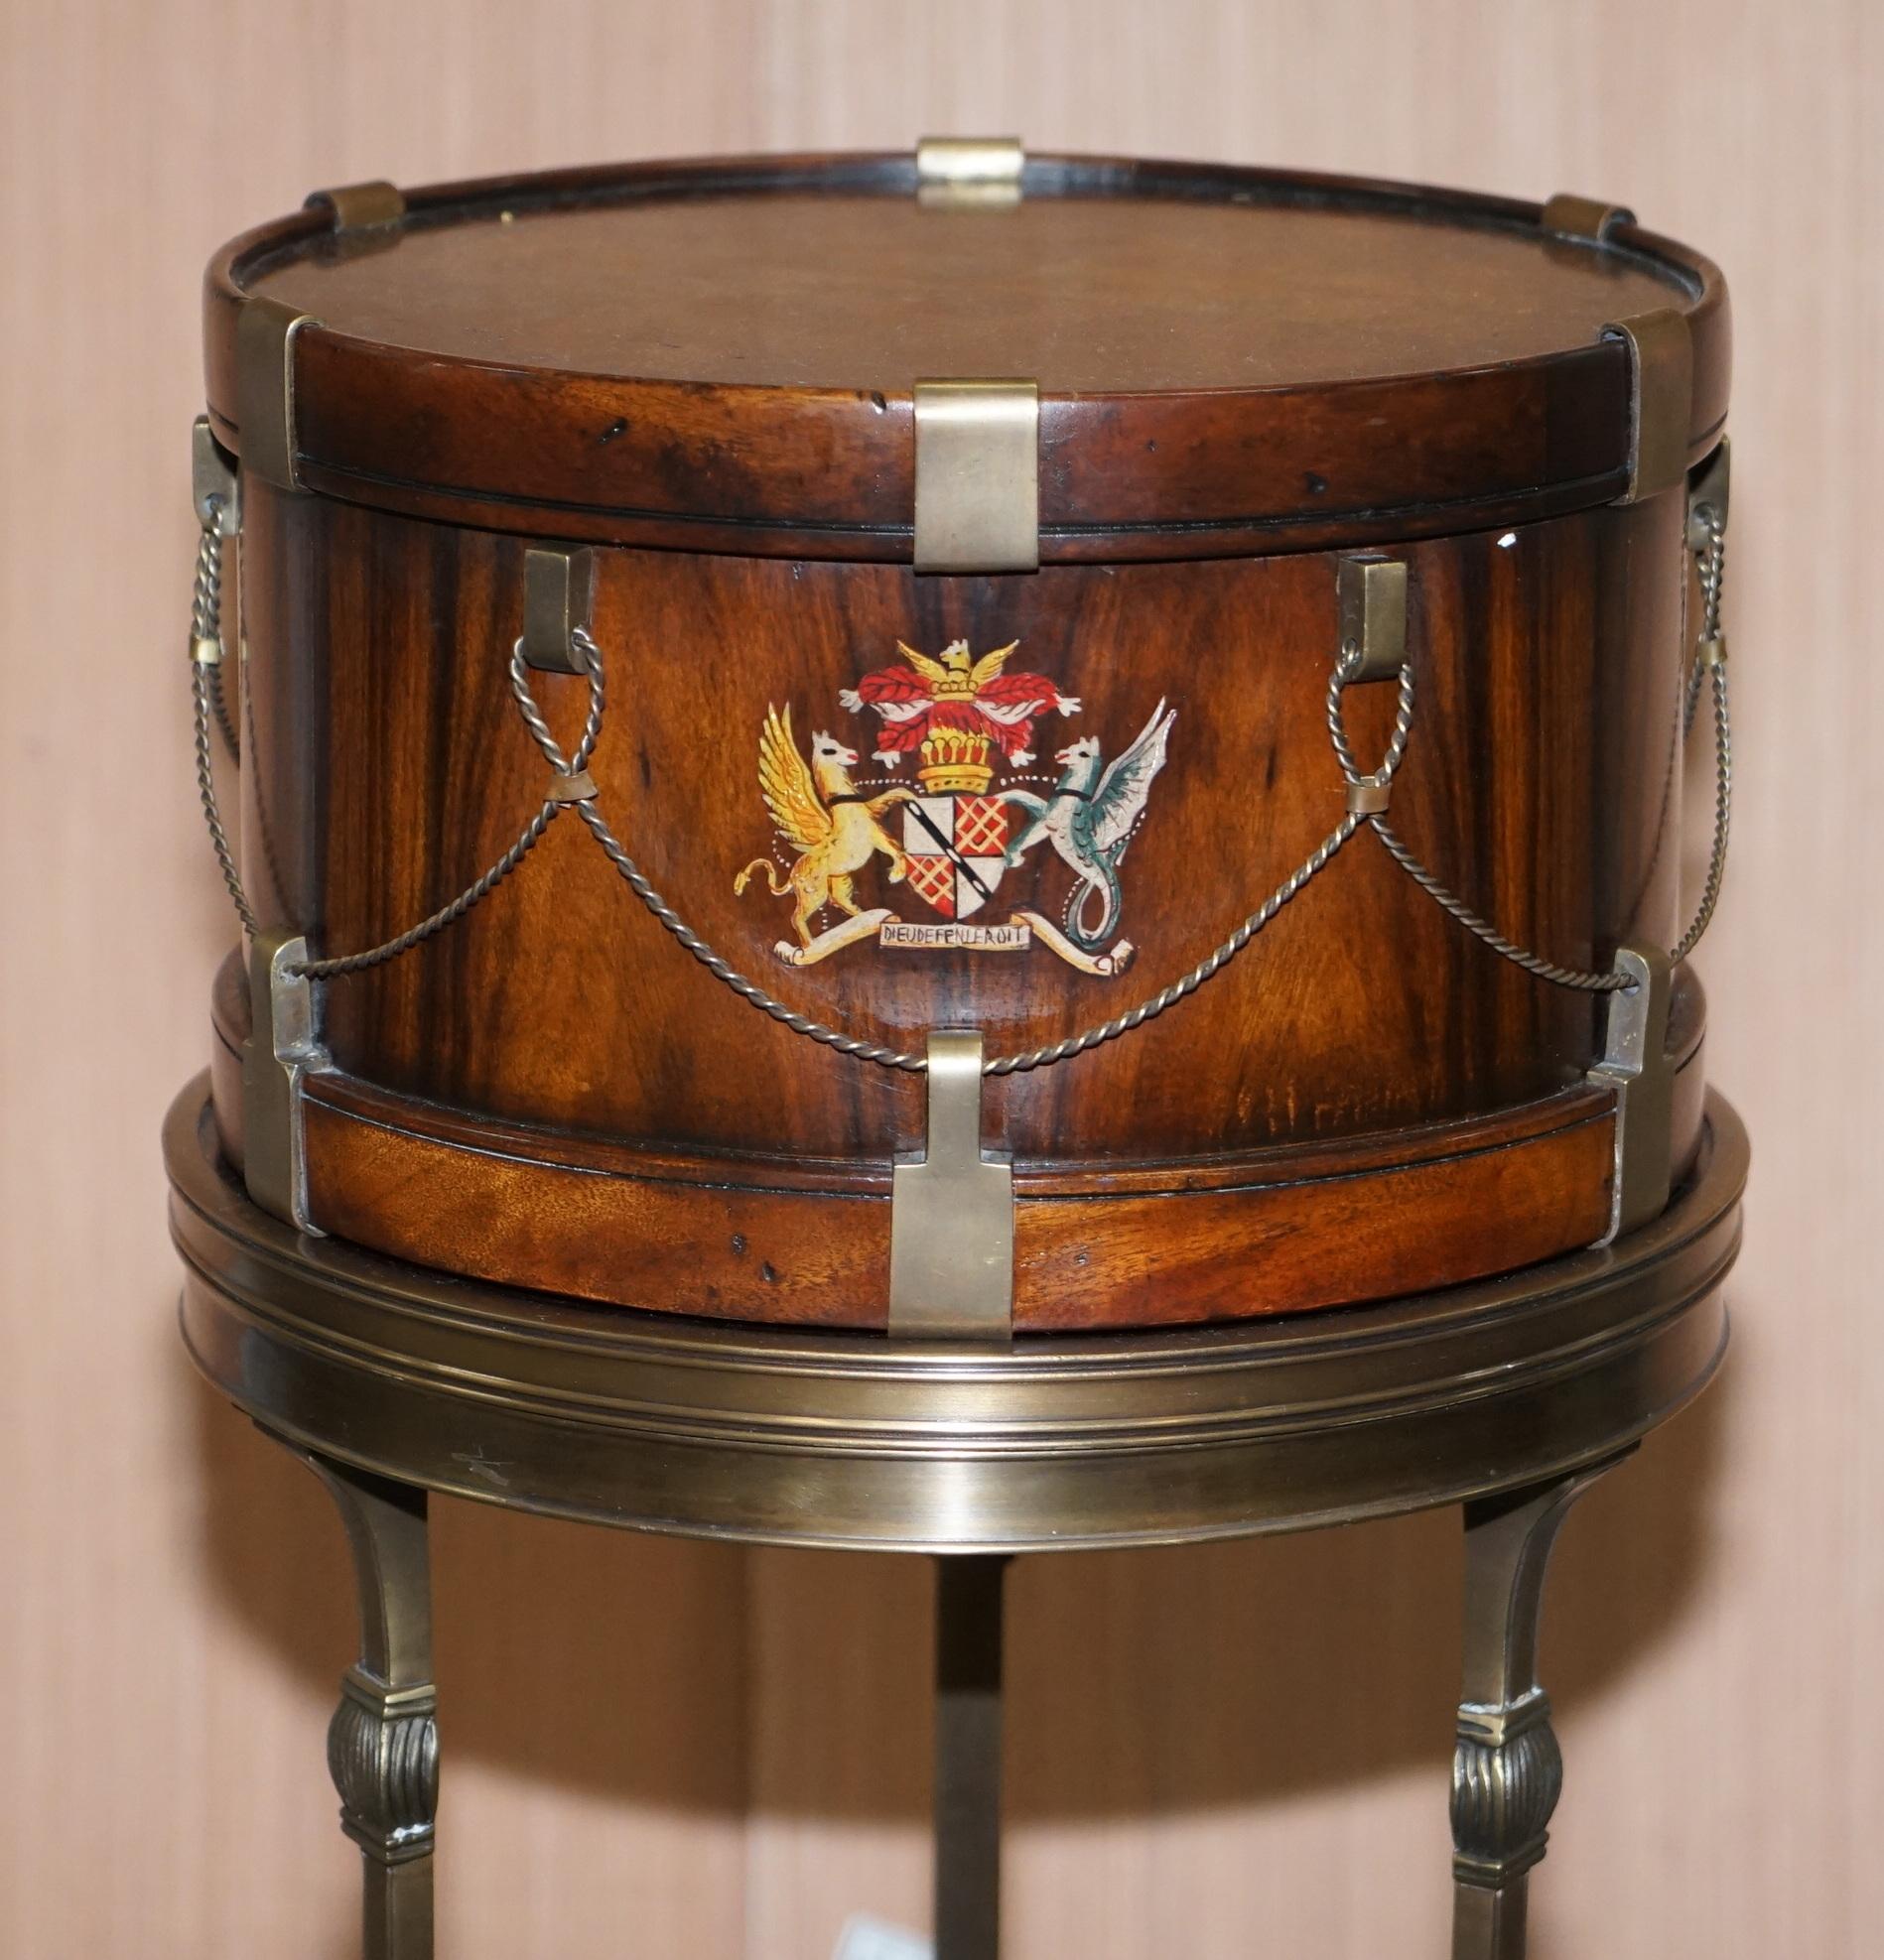 English Stunning Little Side Table with Hand Painted Armorial Crests in the Form of Drum